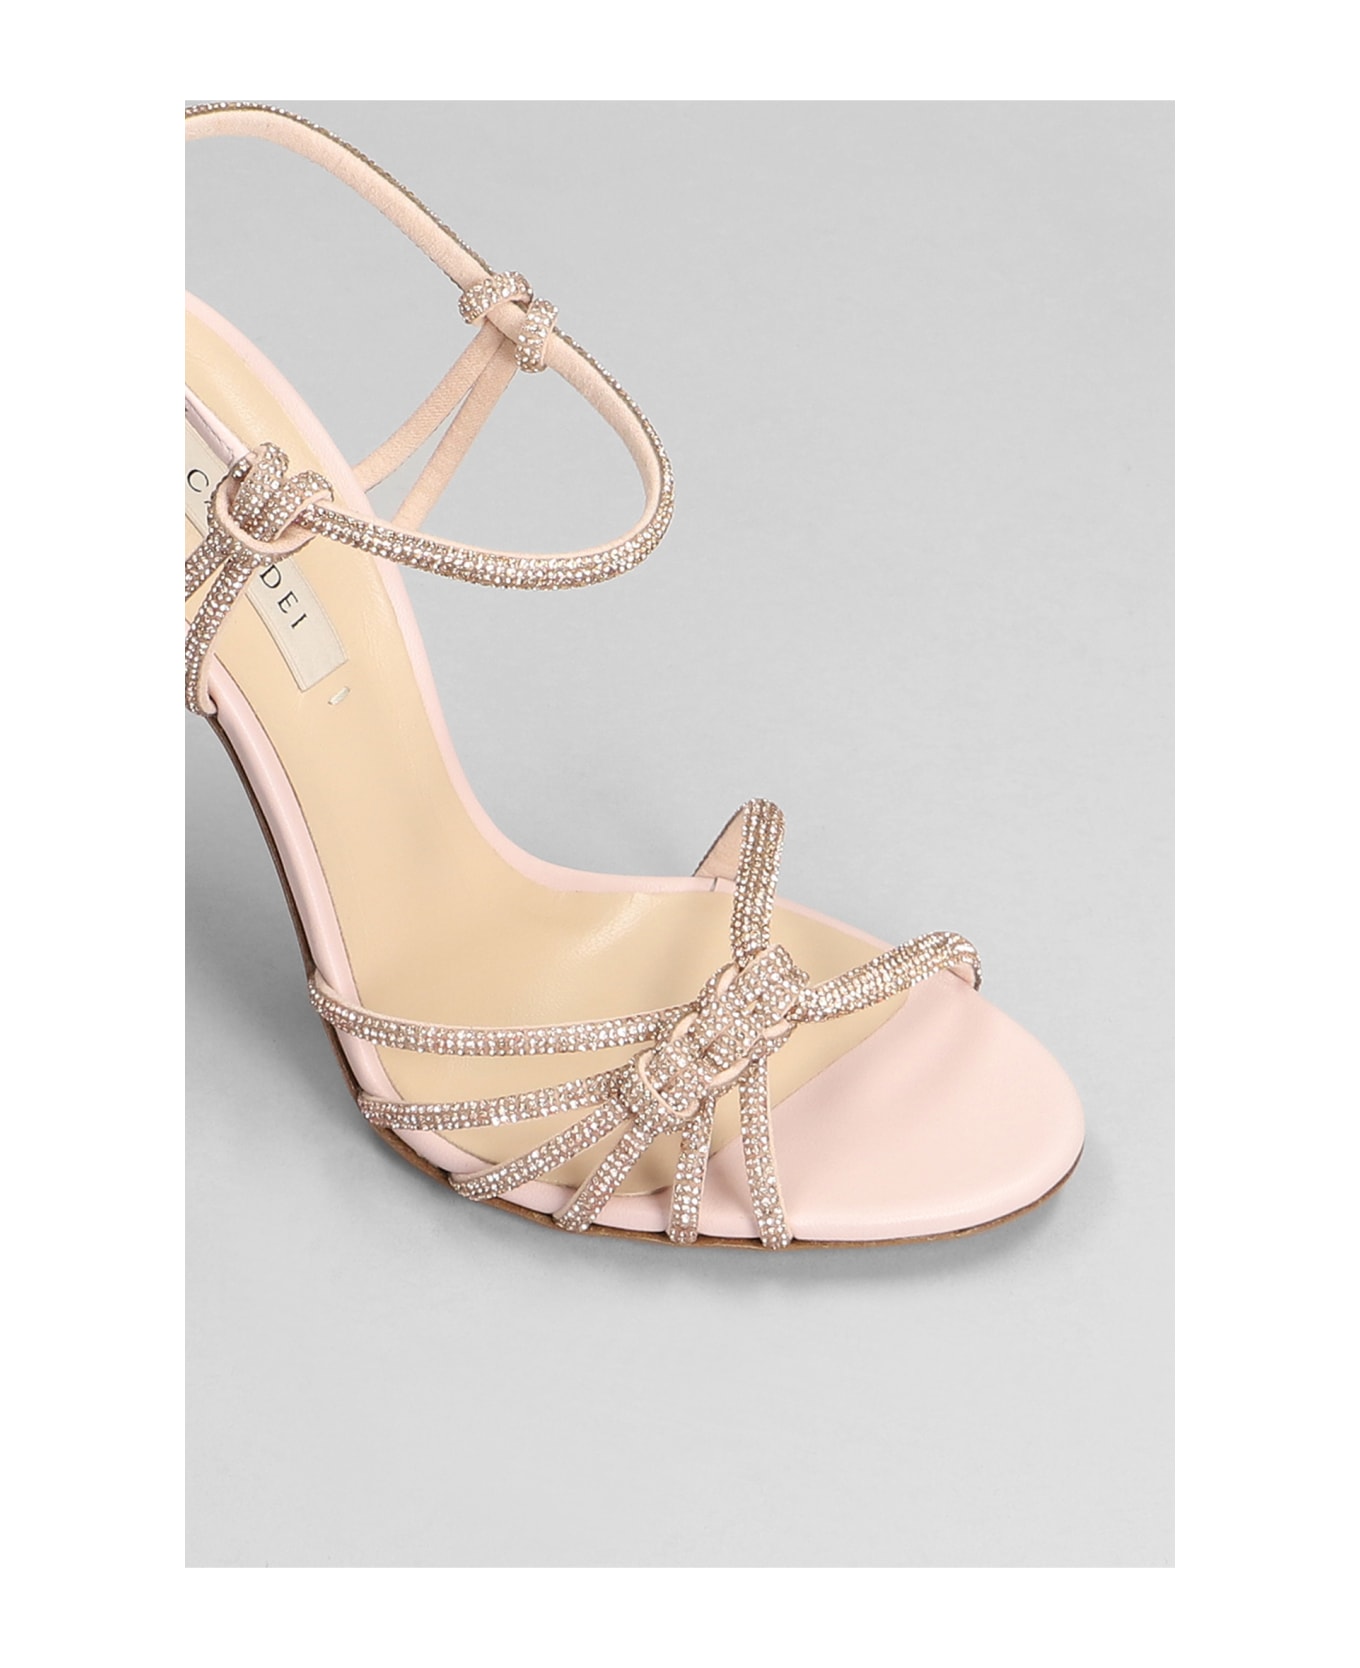 Casadei Sandals In Rose-pink Leather - rose-pink